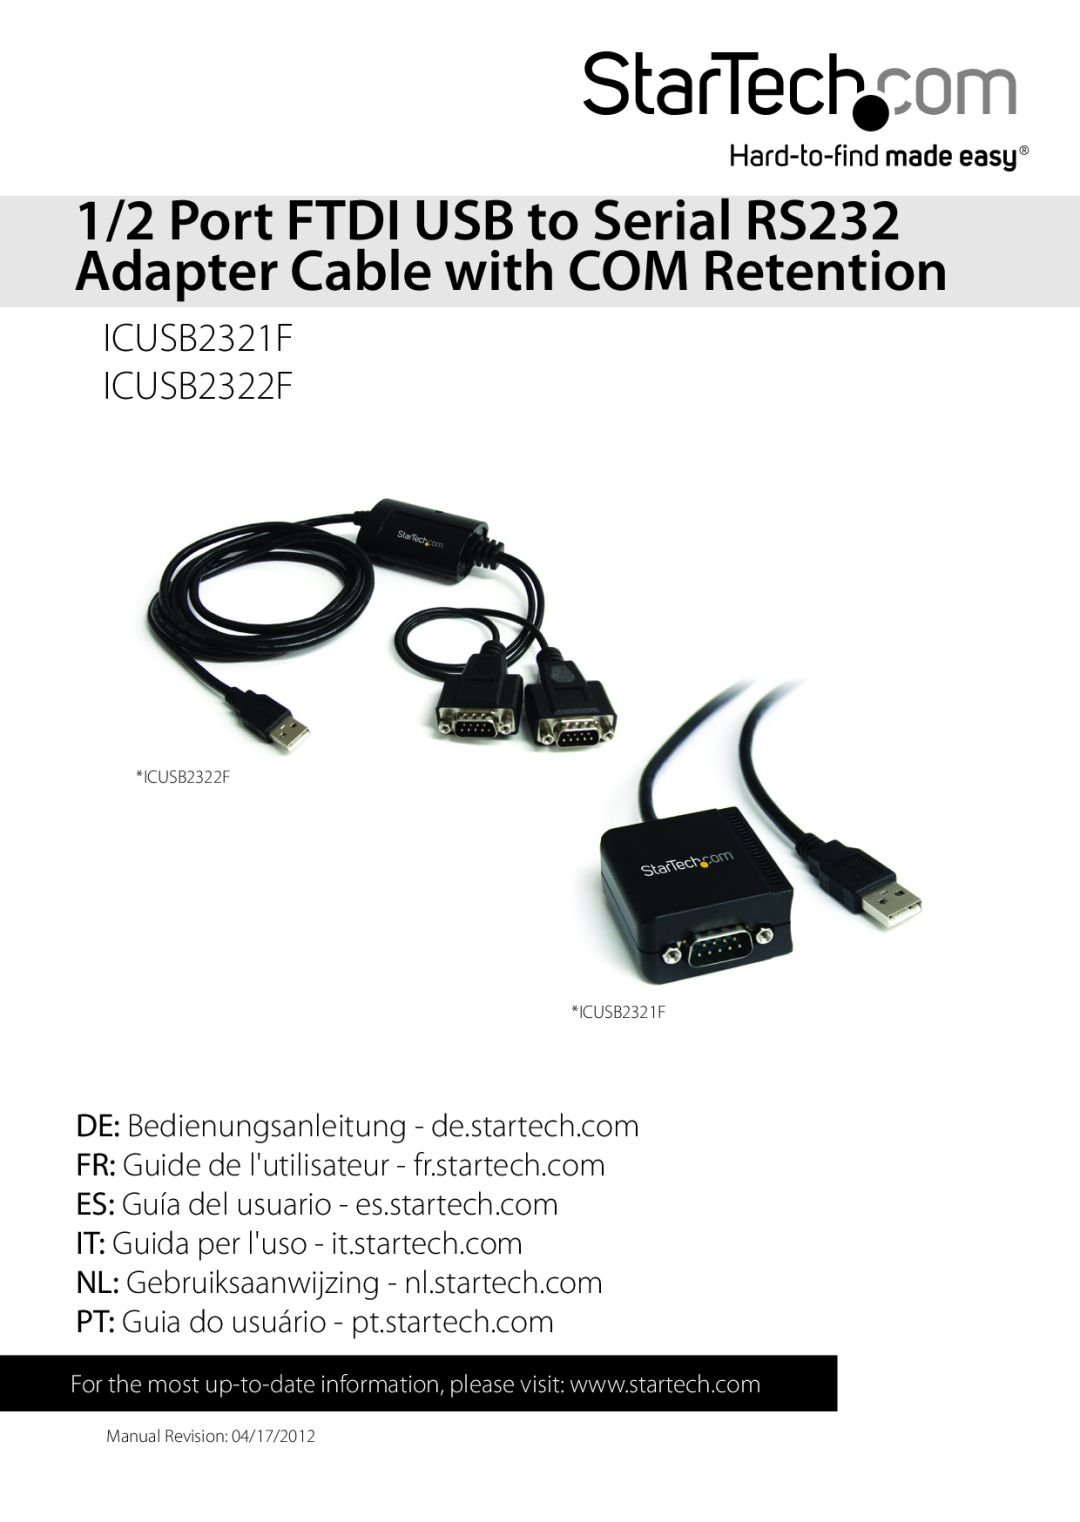 StarTech.com icusb2321f manual 1/2 Port FTDI USB to Serial RS232 Adapter Cable with COM Retention, ICUSB2321F ICUSB2322F 